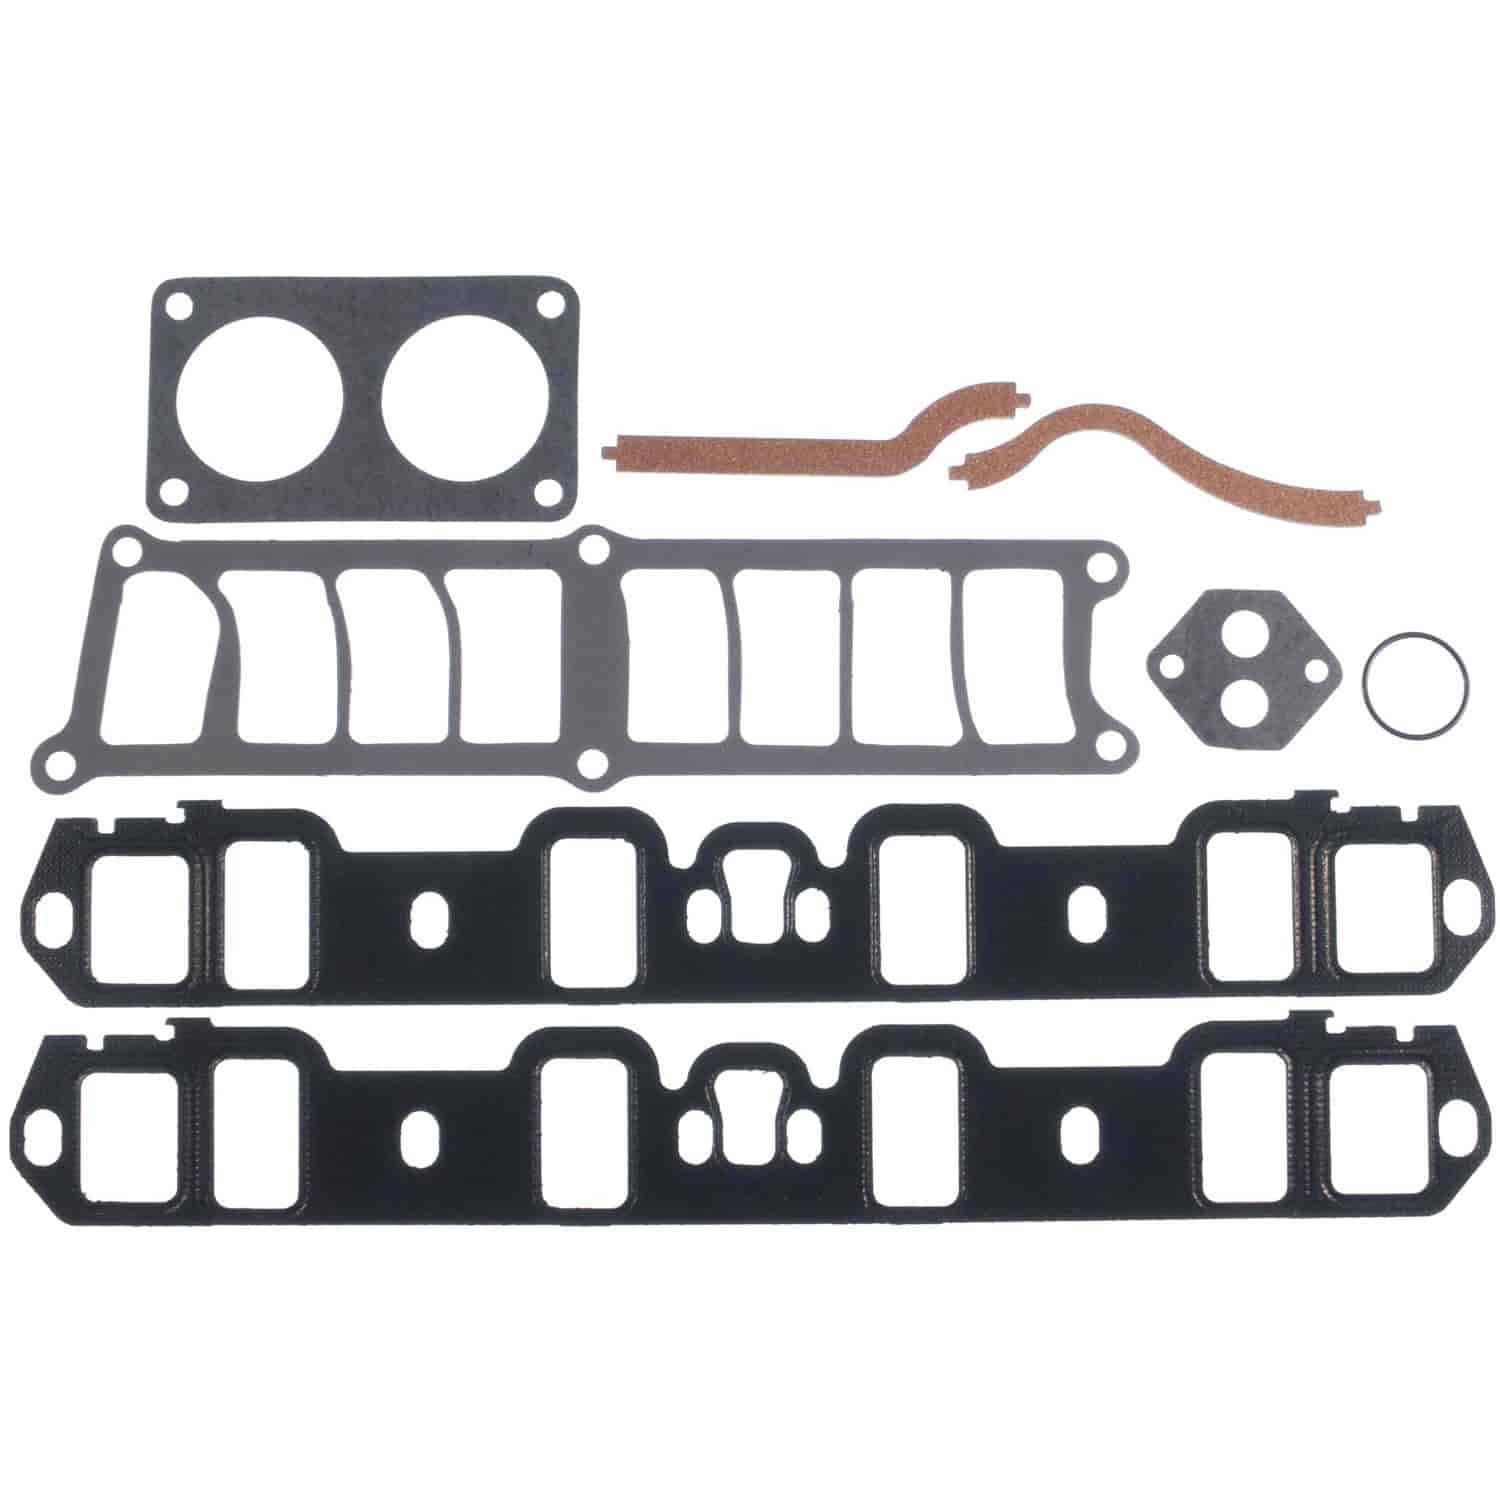 Intake Manifold Gasket 1986-1995 Small Block Ford V8 302 (5.0L) for Truck Applications